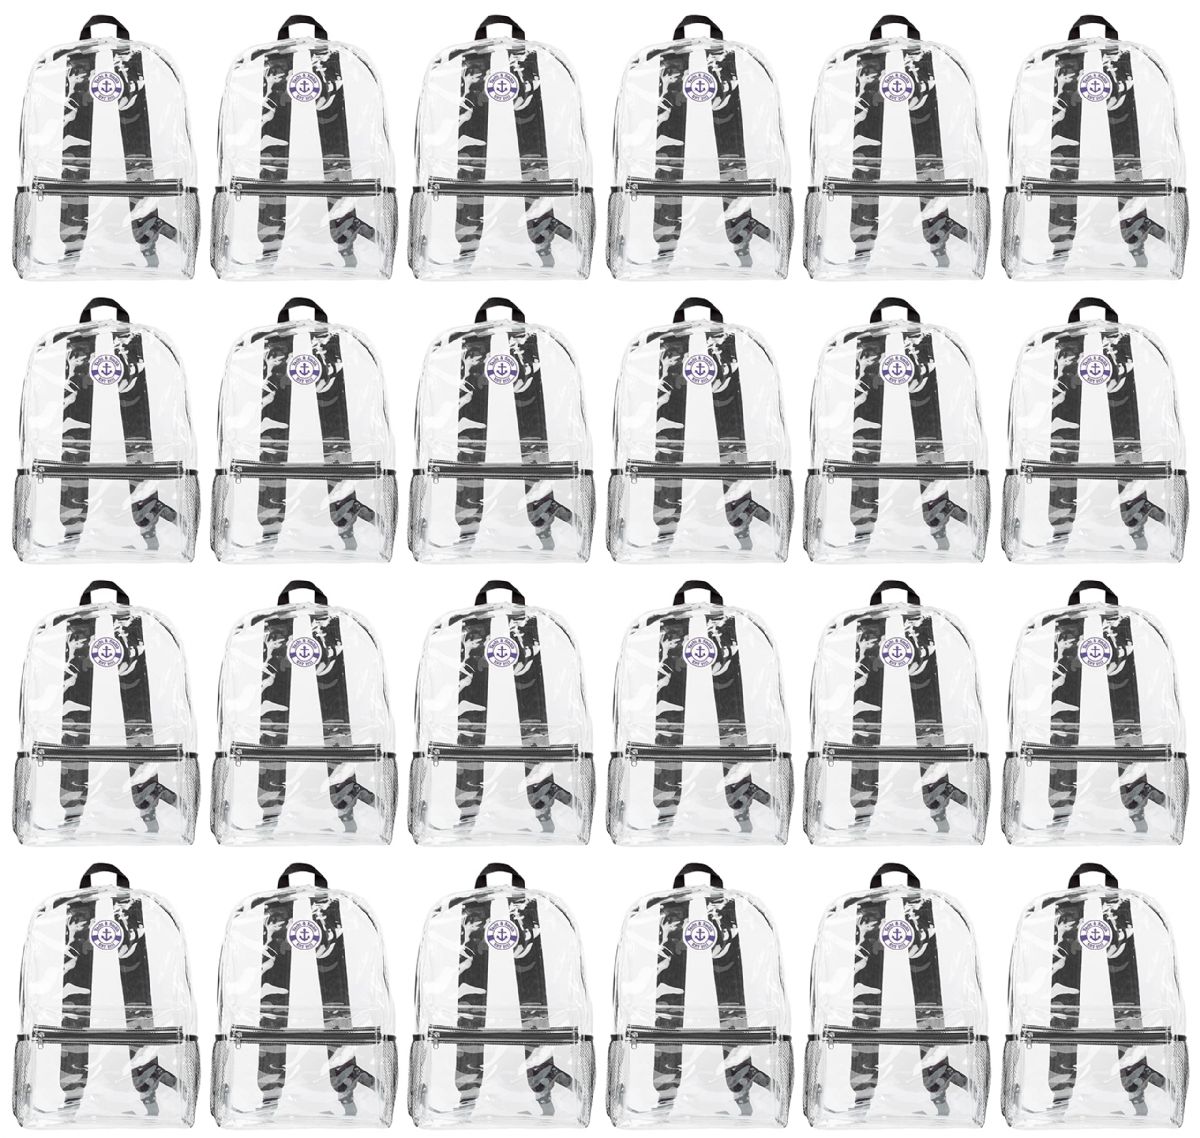 24 Wholesale 17 Inch Backpacks For Kids, Clear With Black Trim, 24 Pack